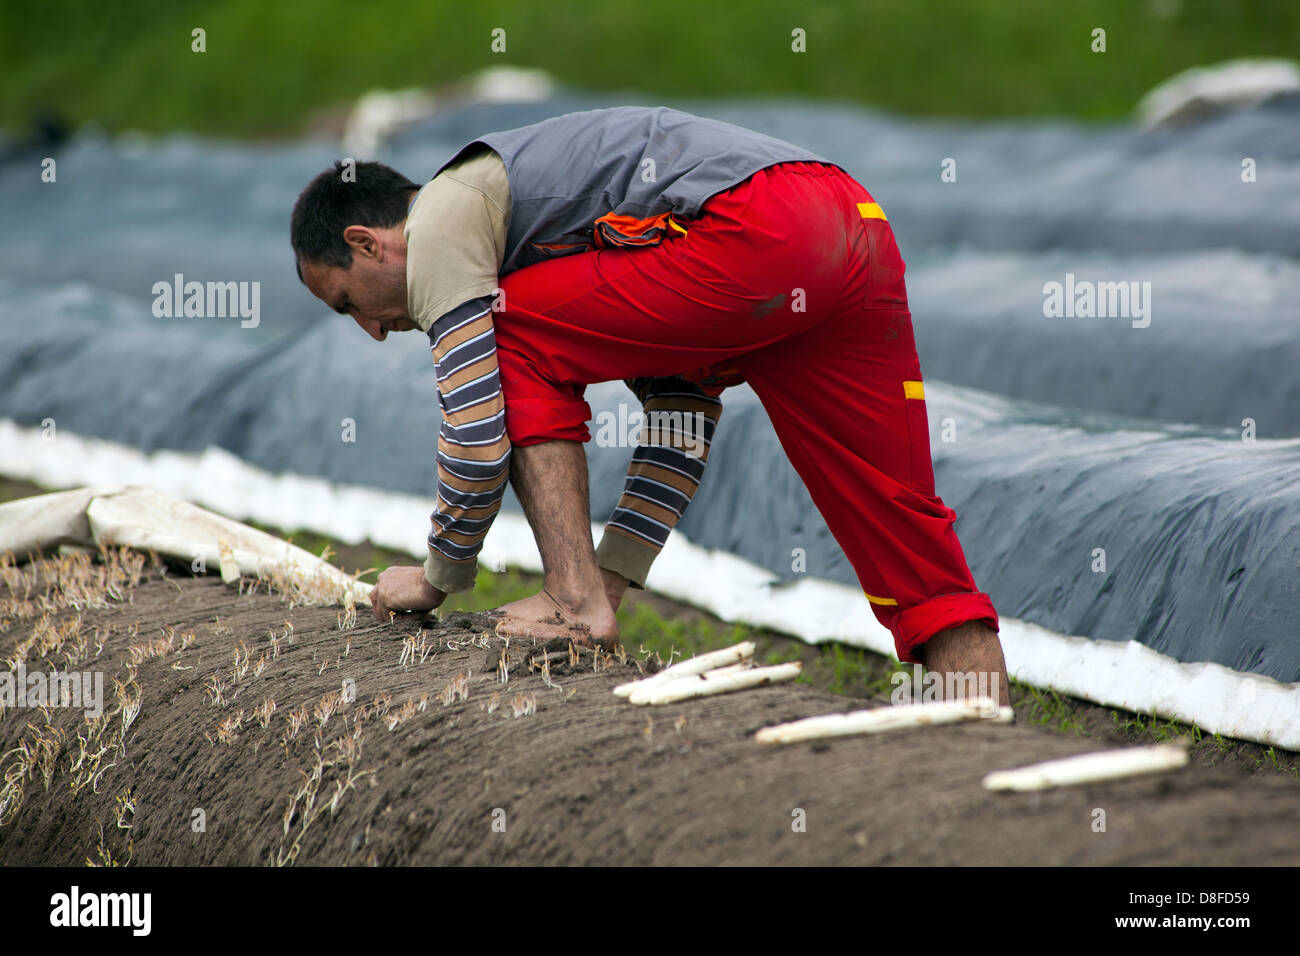 Seasonal worker harvesting and picking asparagus, field, Czech Republic Stock Photo